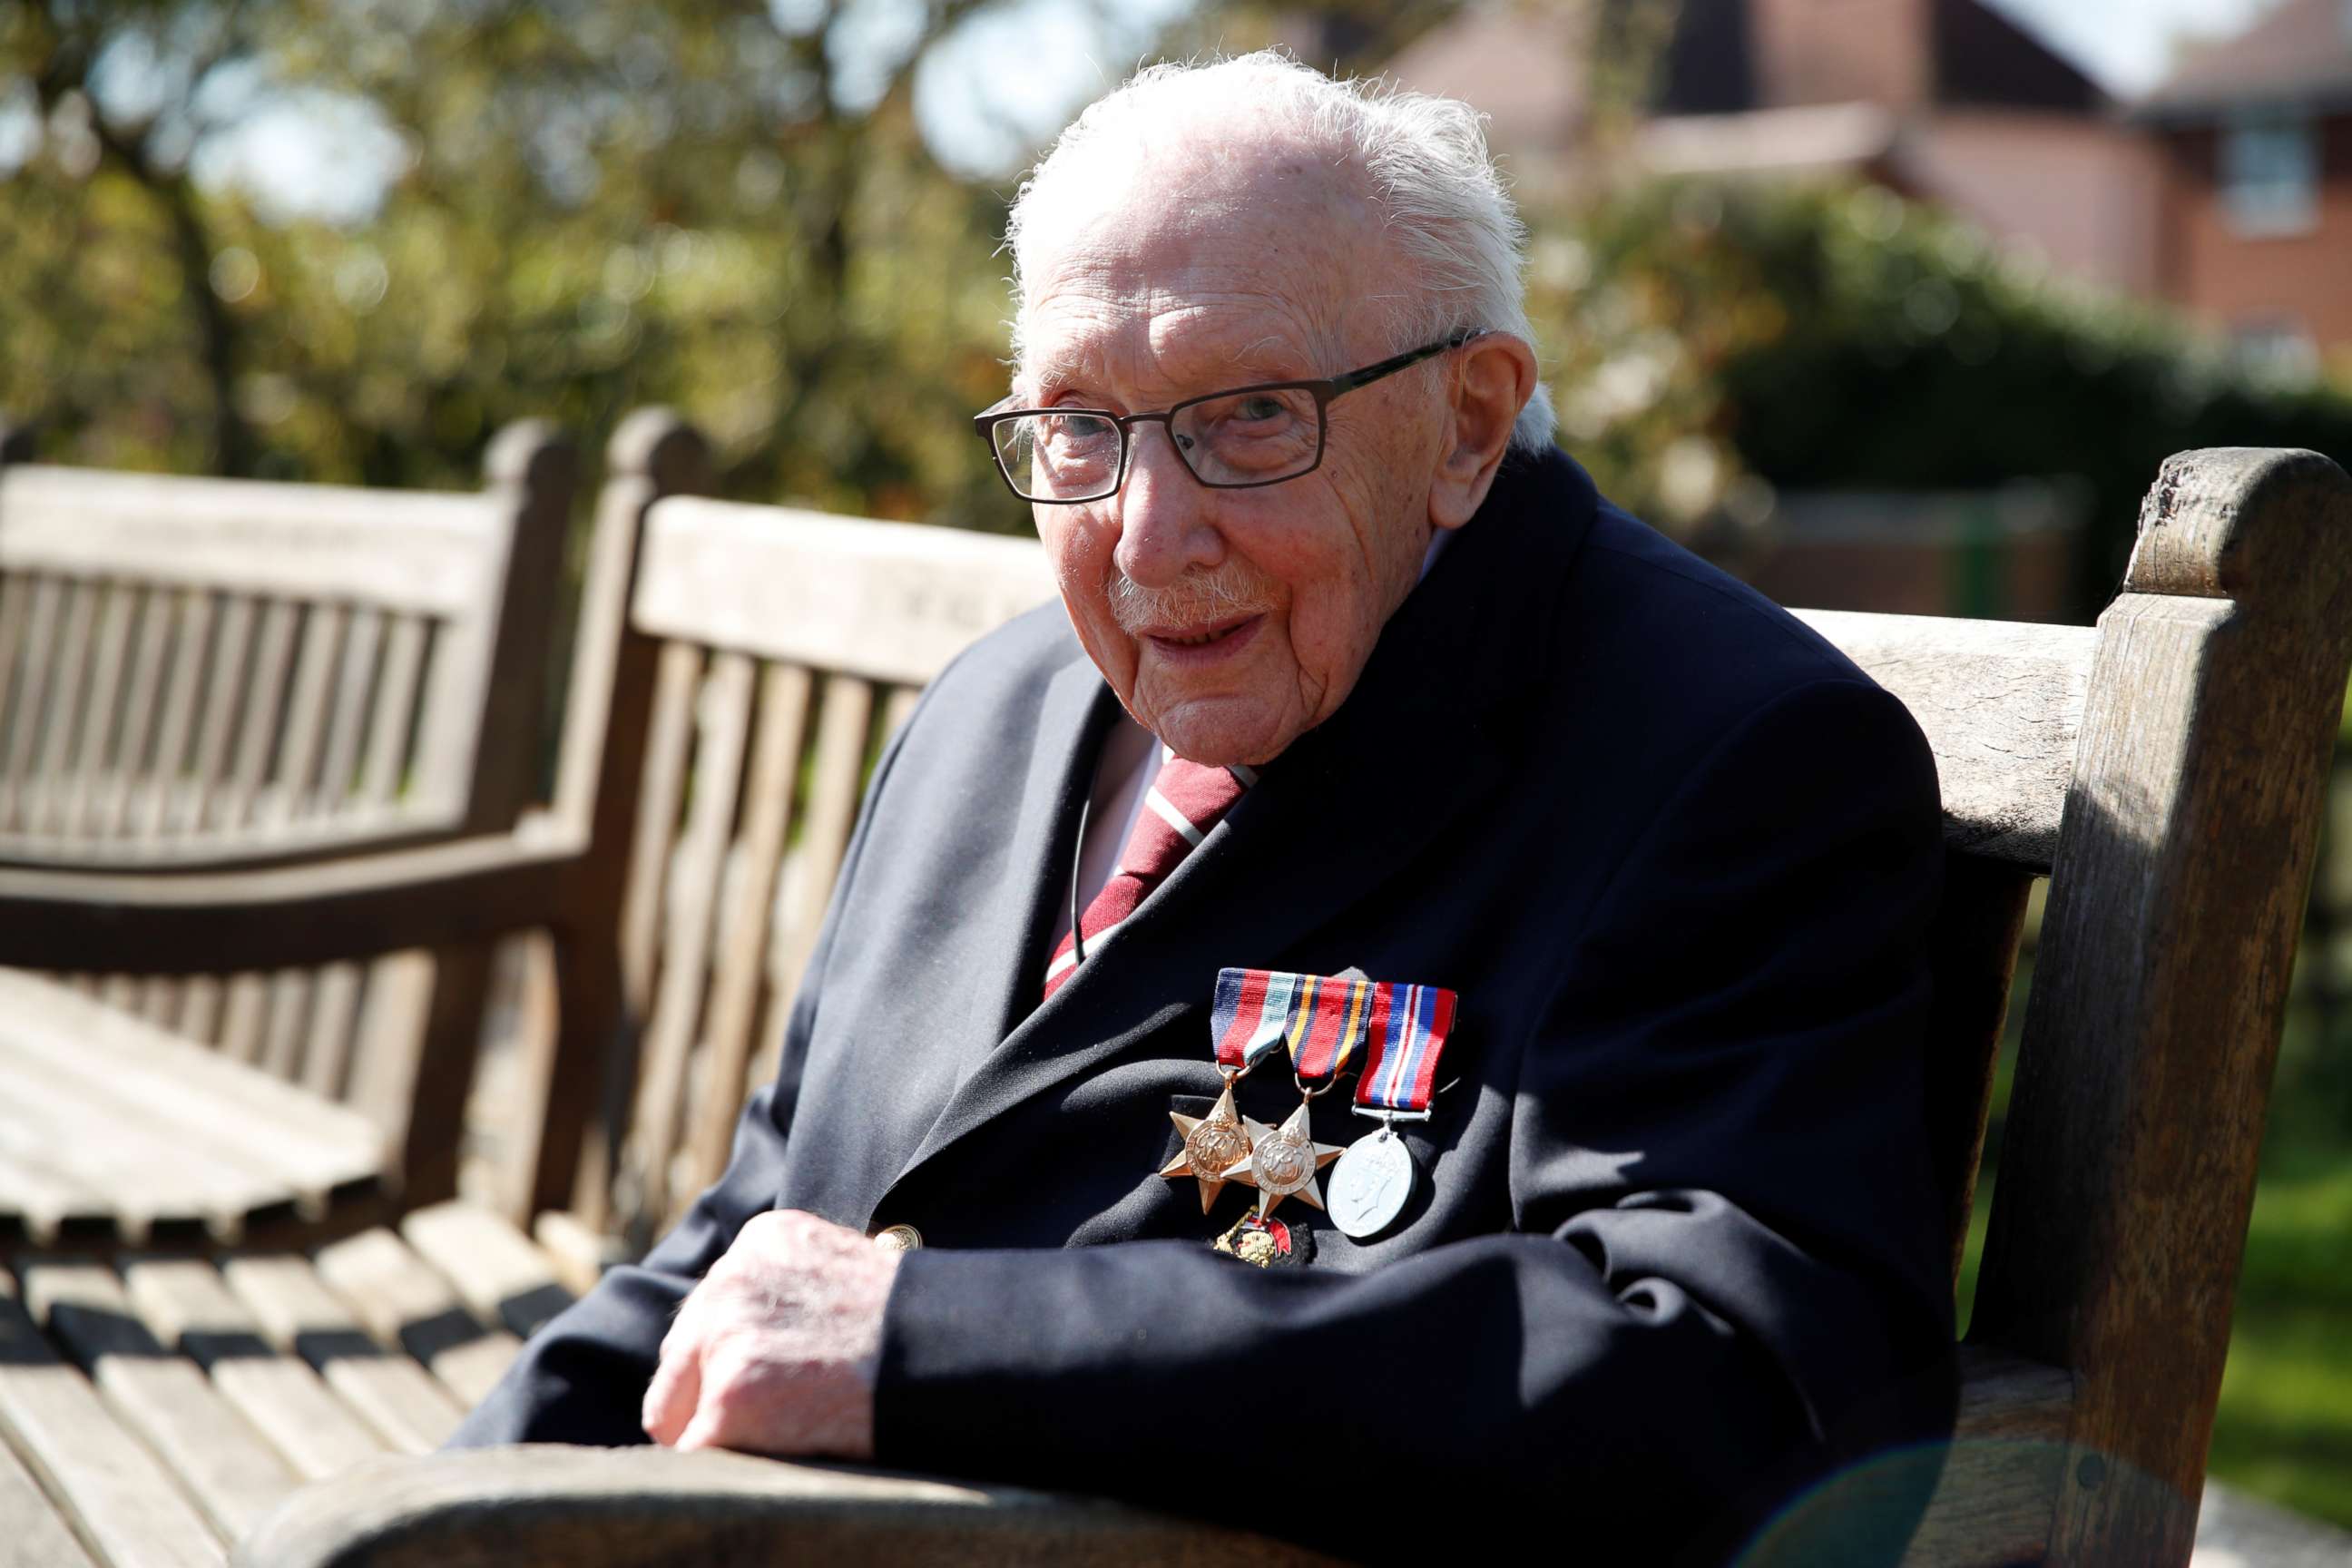 PHOTO: Retired British Army Captain Tom Moore, 99, raises money for health workers by attempting to walk the length of his garden one hundred times before his 100th birthday this month in Marston Moretaine, Britain, April 15, 2020.